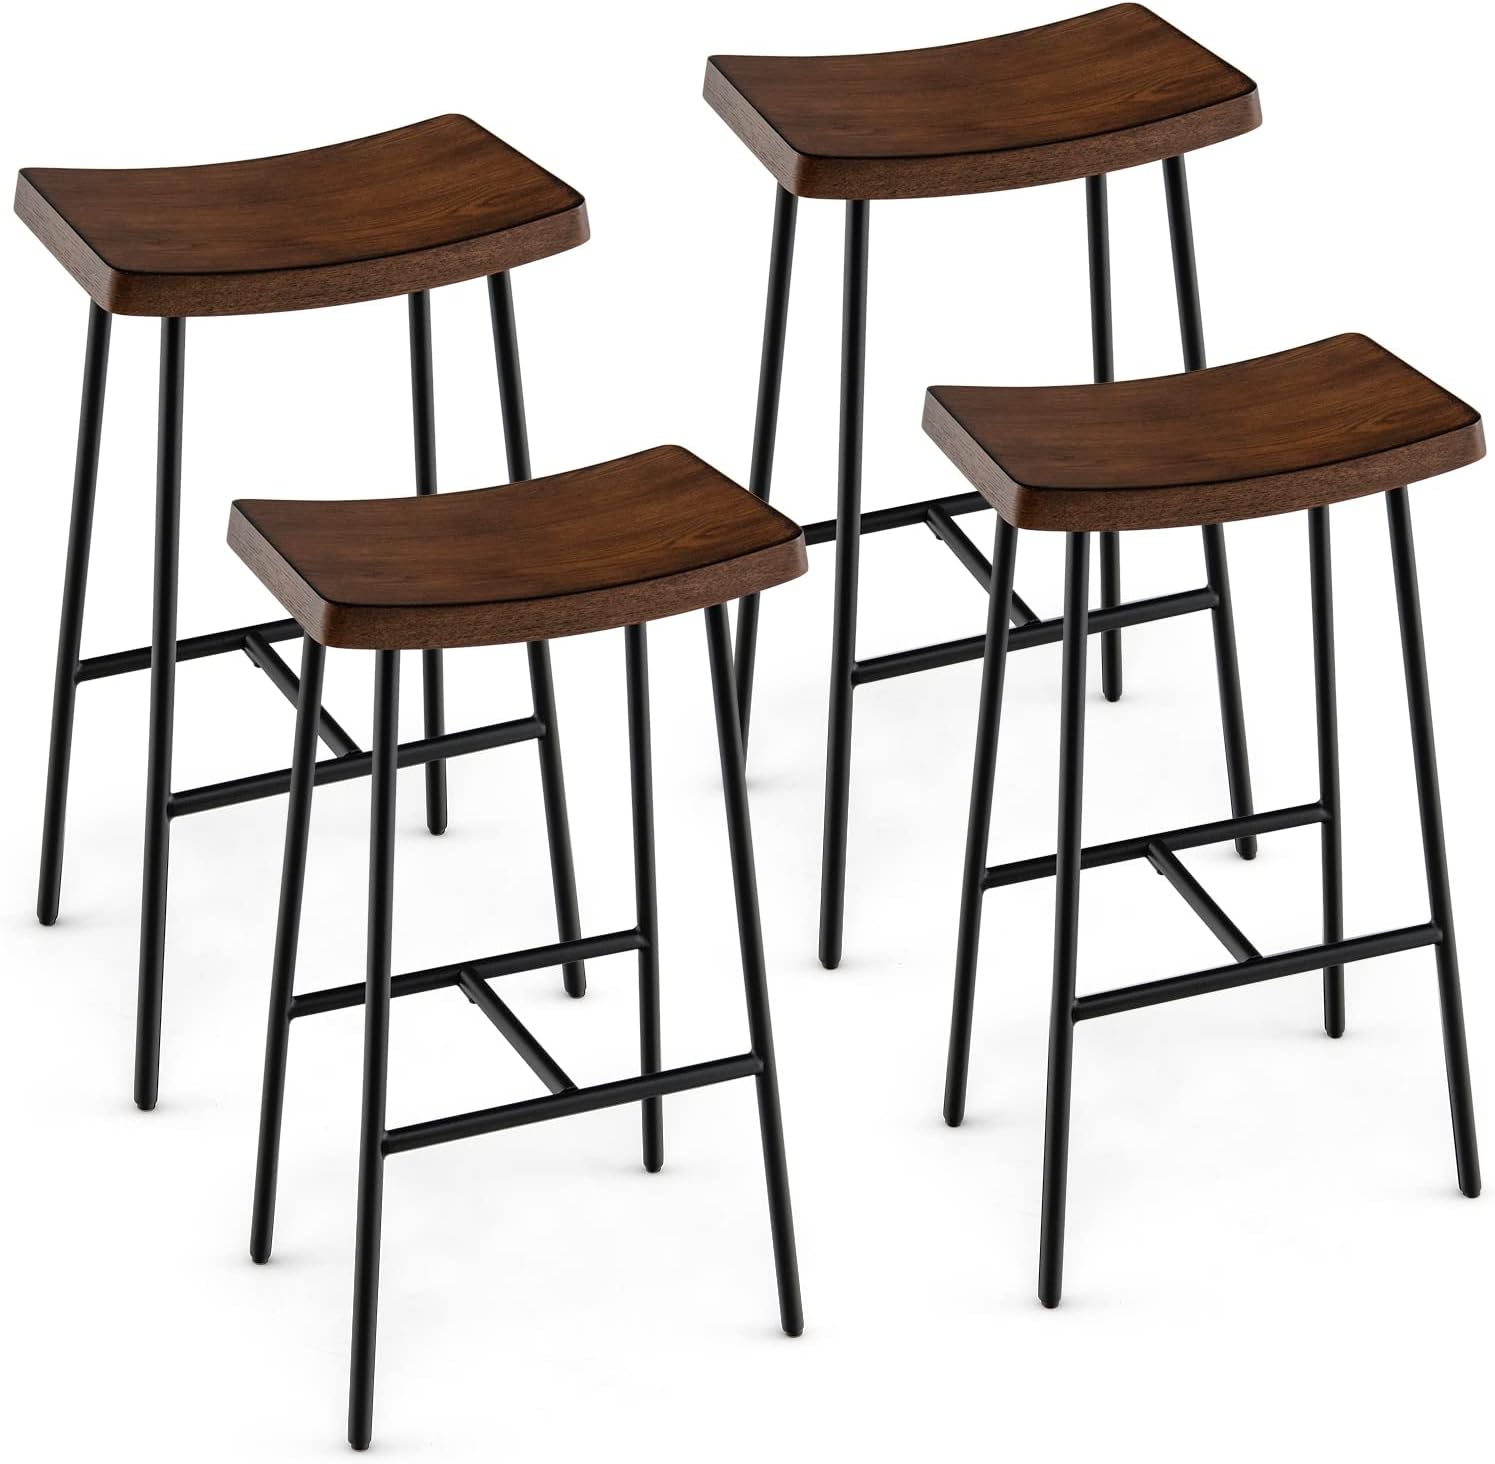 COSTWAY Industrial Saddle Stools Set of 4, 29-Inch Height Backless Bar Stools with Footrest, Adjustable Foot Pads, Counter Chairs for Kitchen Island Dining Living Room, Rustic Brown